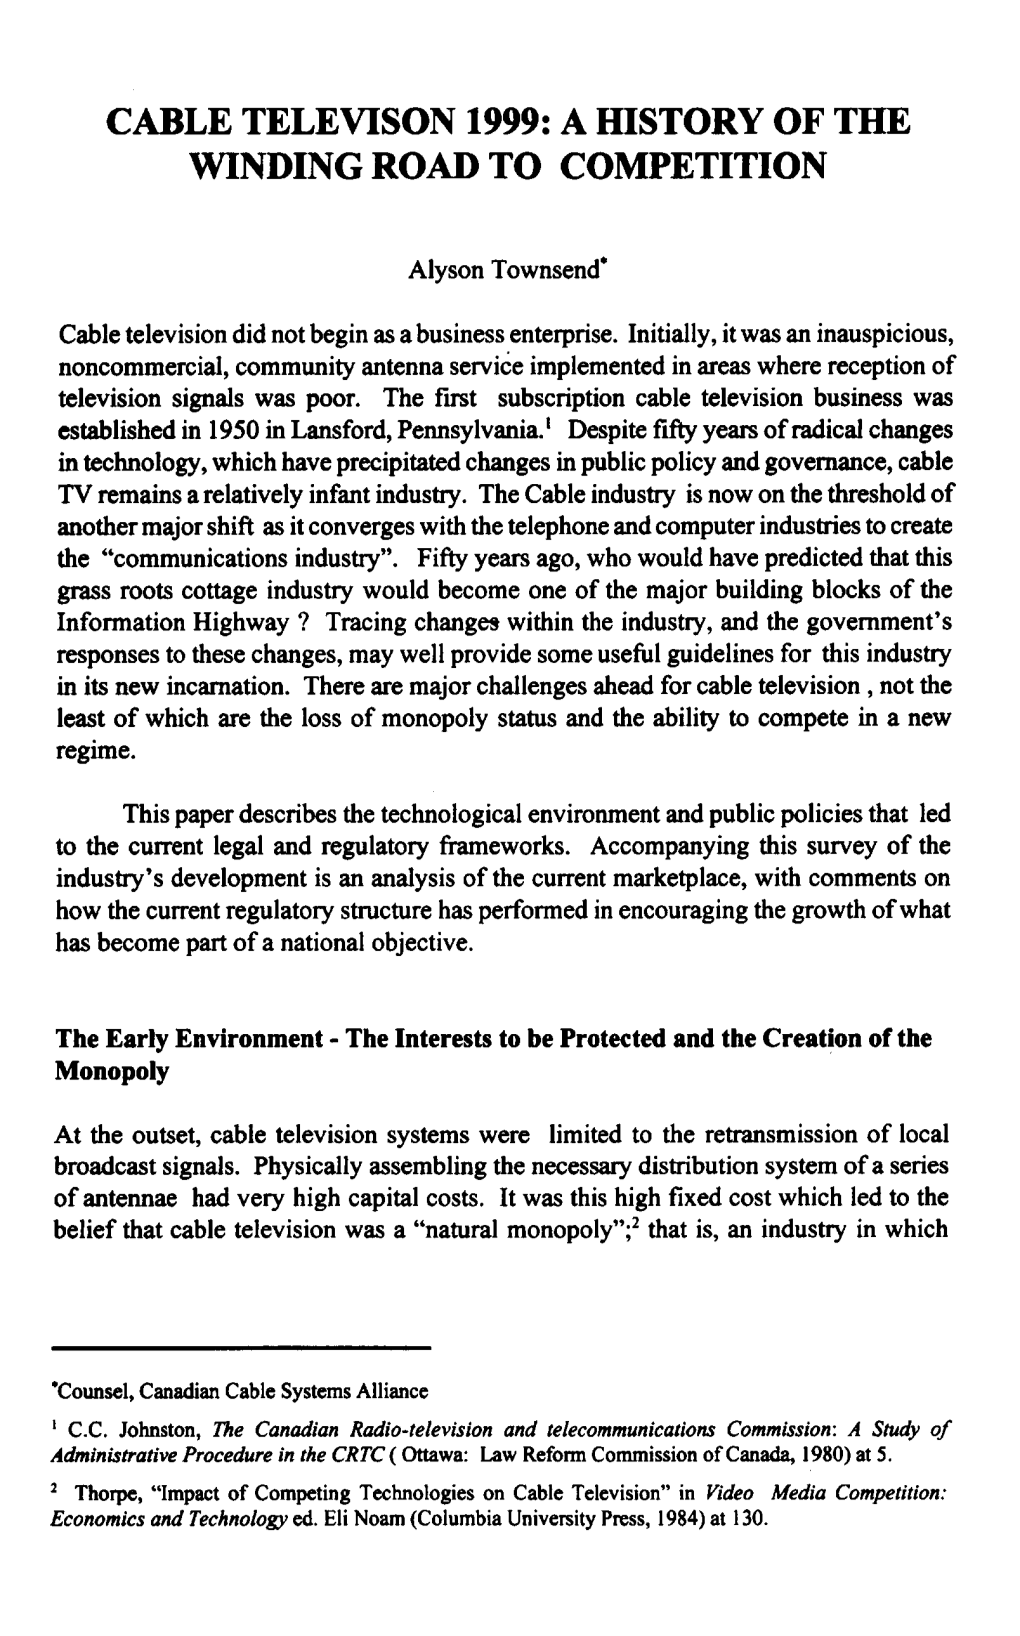 Cable Televison 1999: a History of the Winding Road to Competition